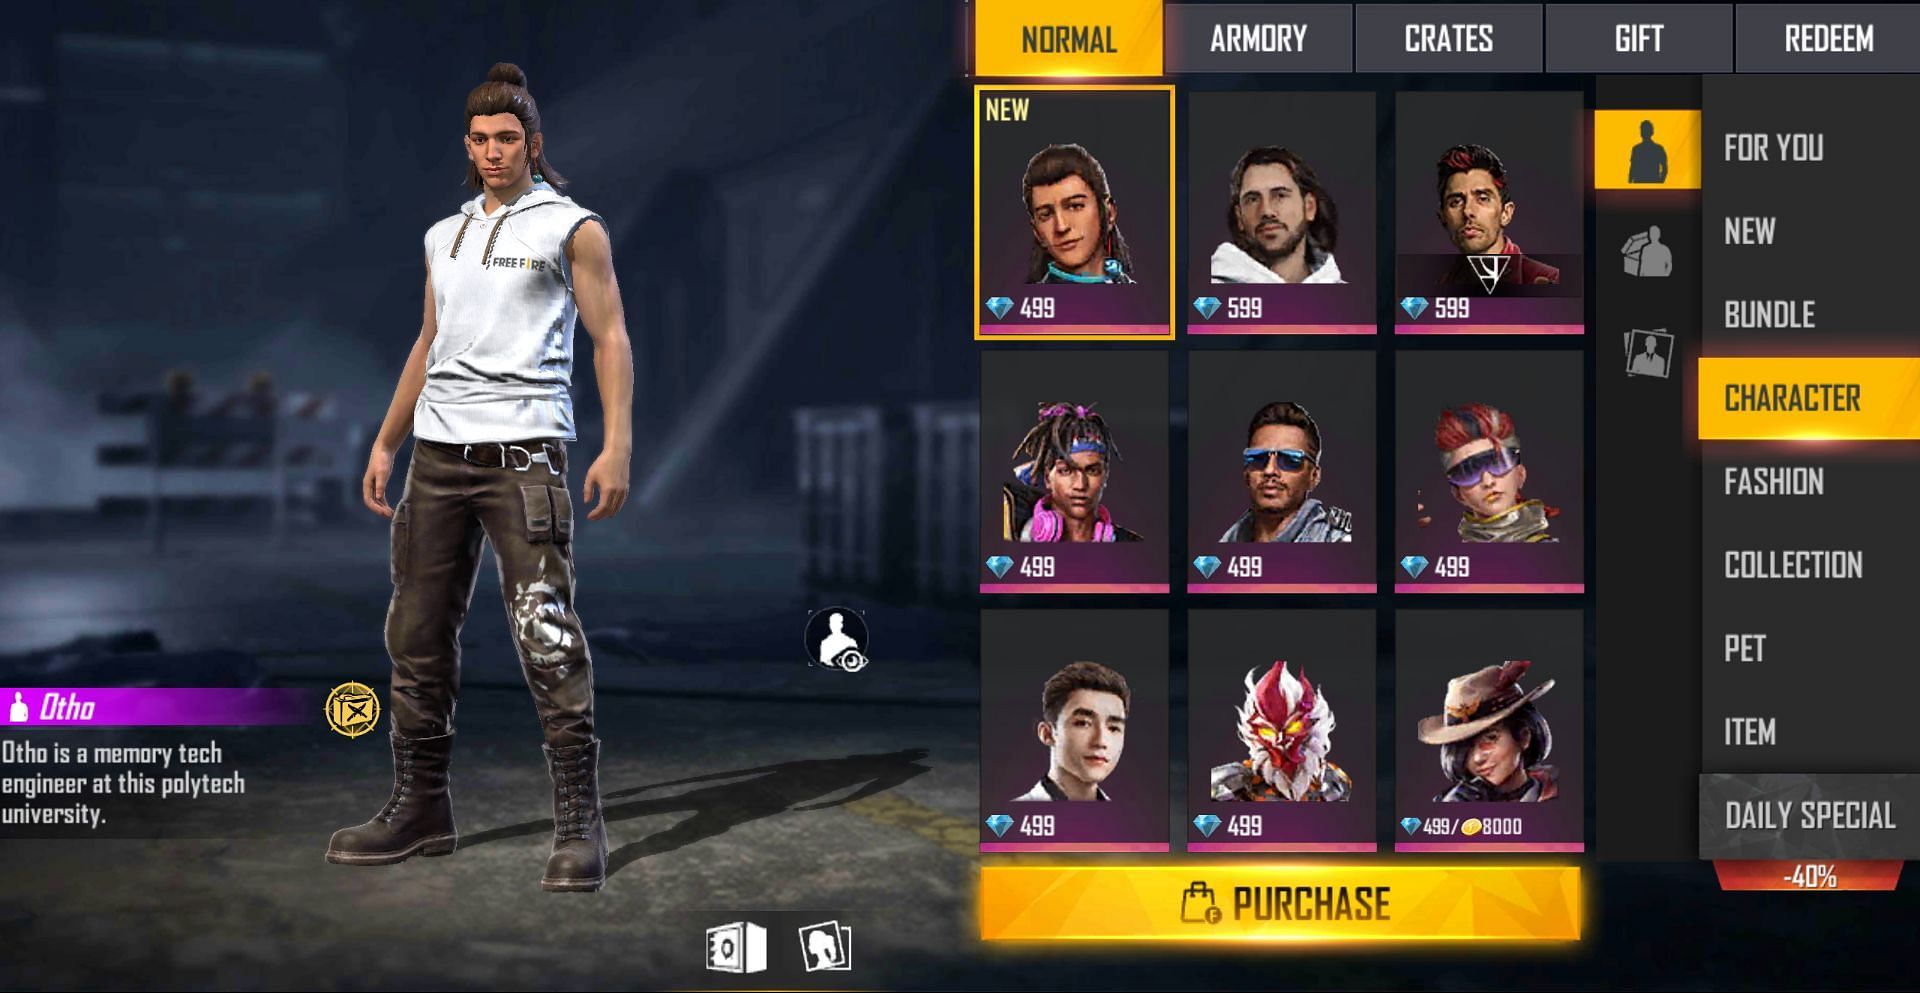 Characters possess special abilities in Garena Free Fire (Image via Free Fire)